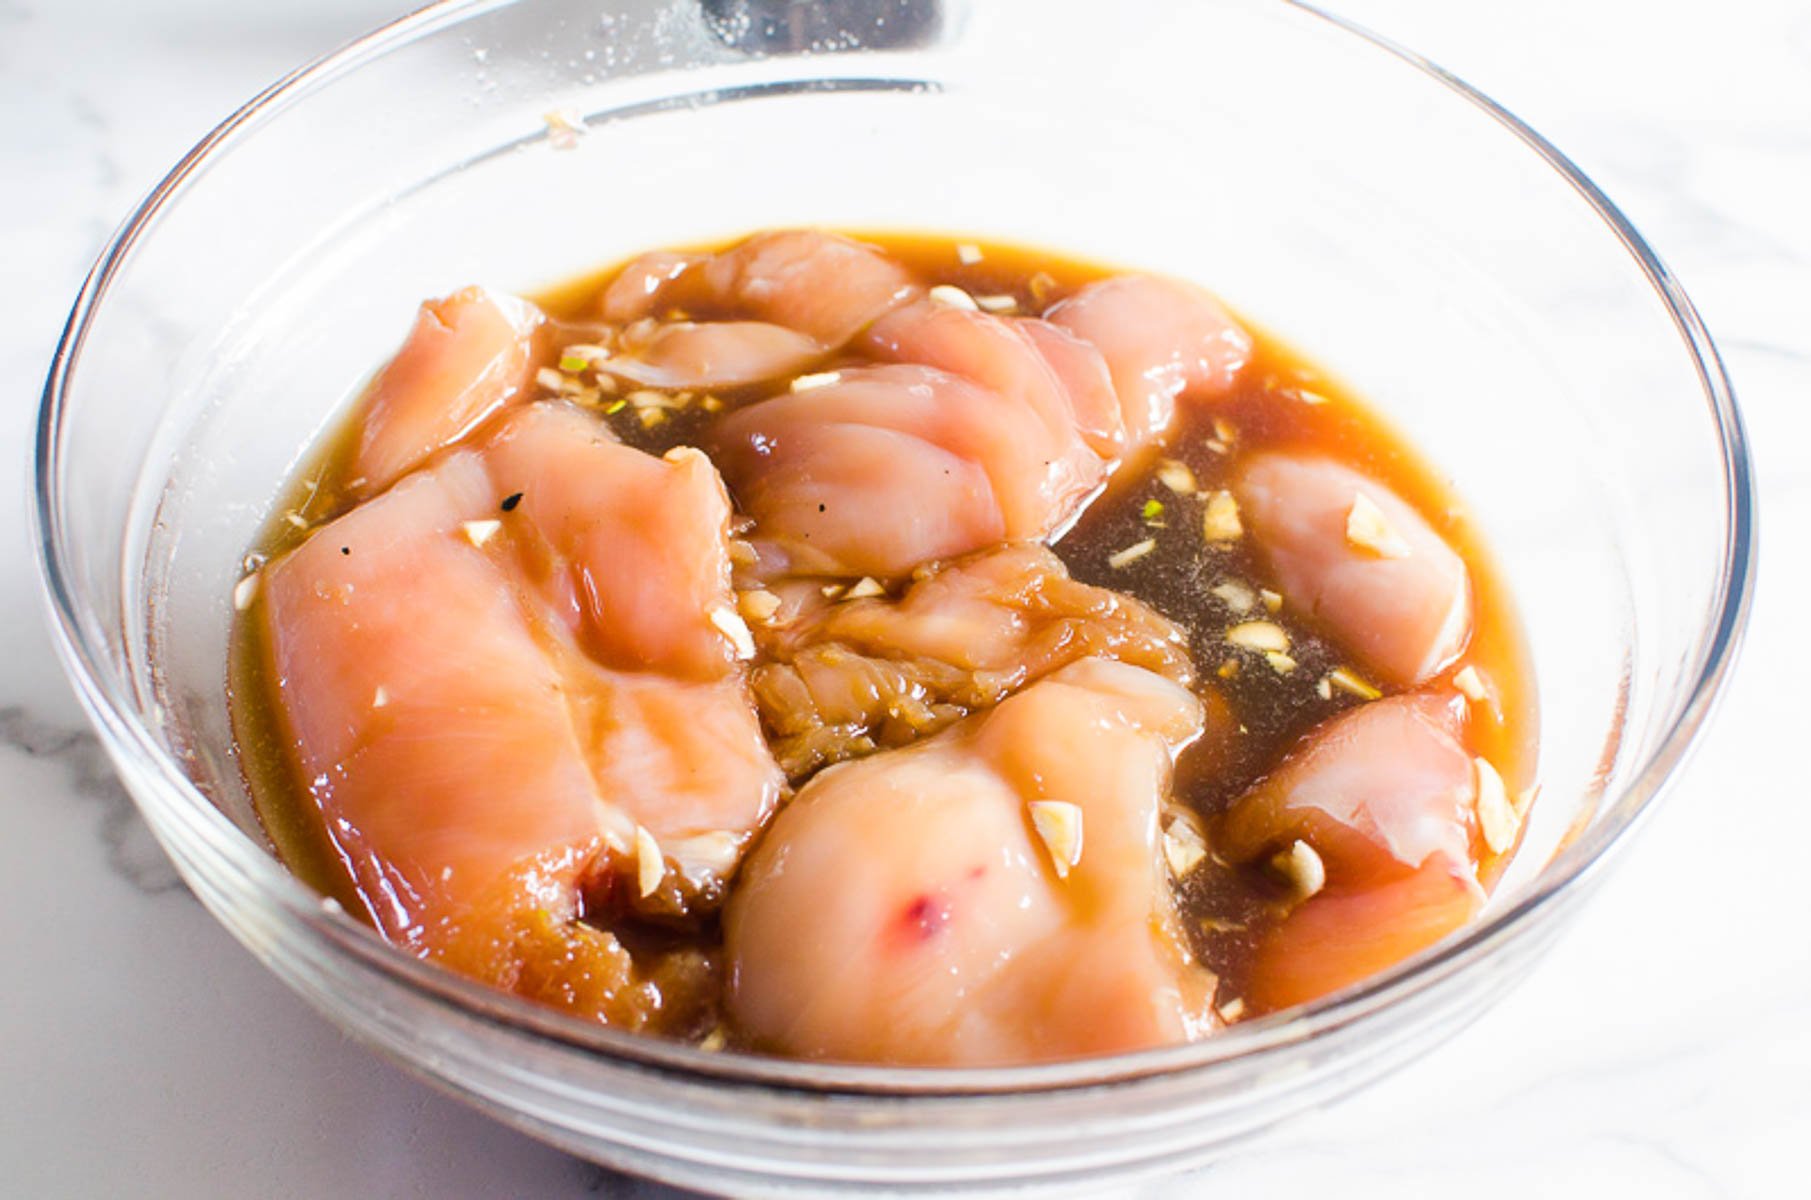 Chicken pieces marinating in a bowl.